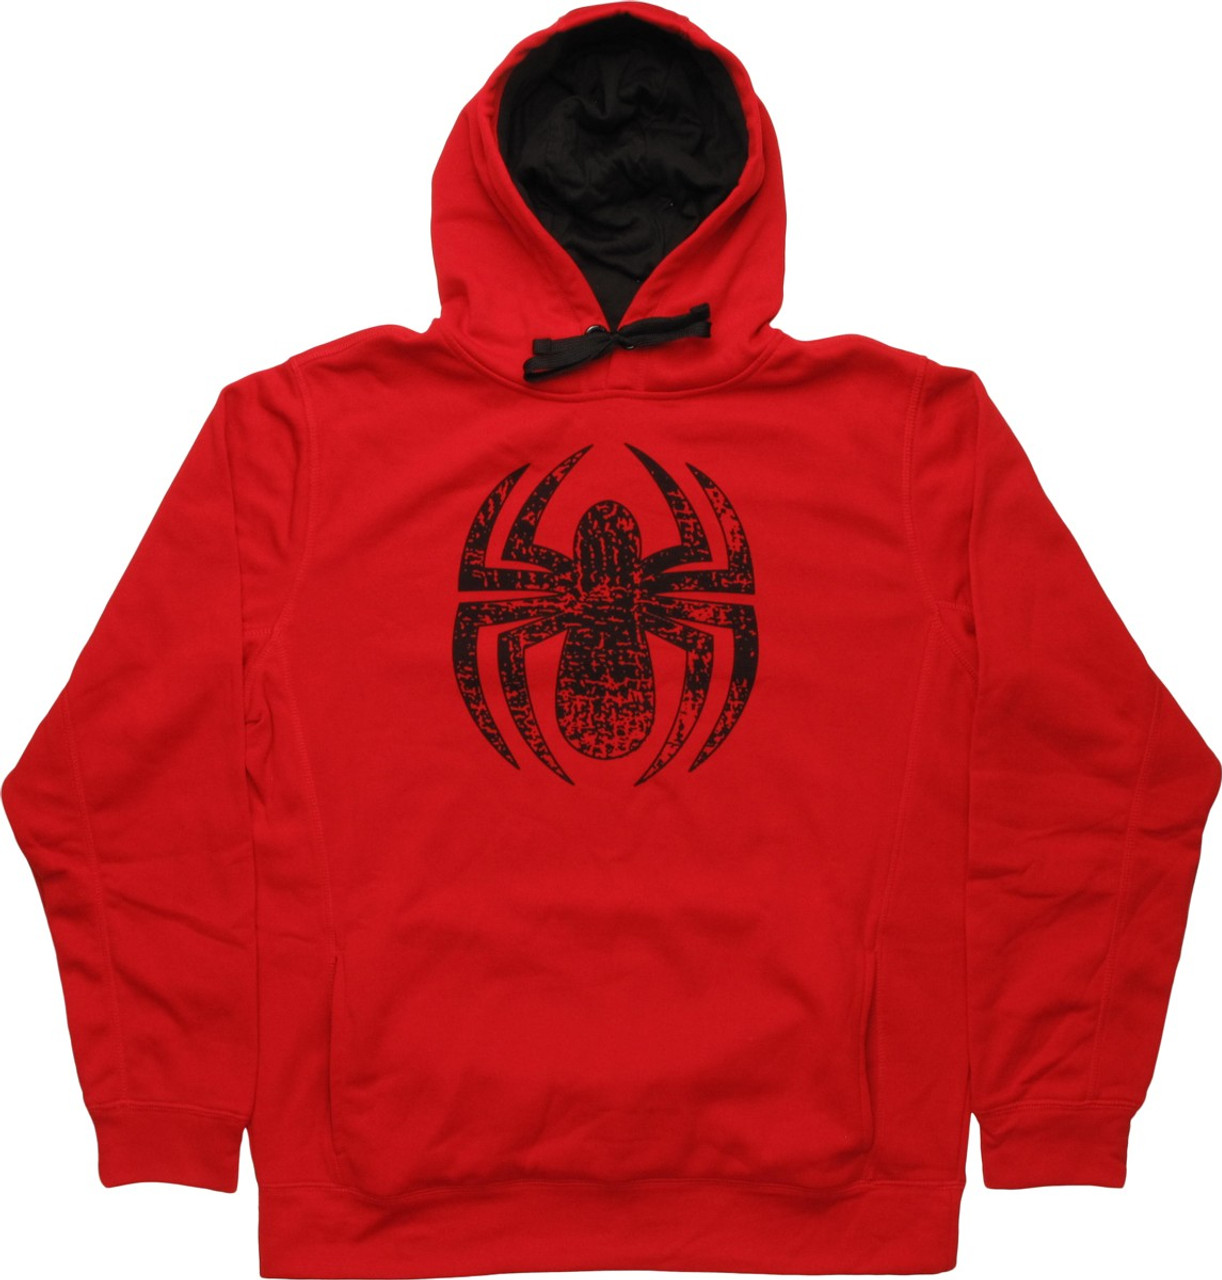 Red Sp5der Hoodie - With Discount Offer